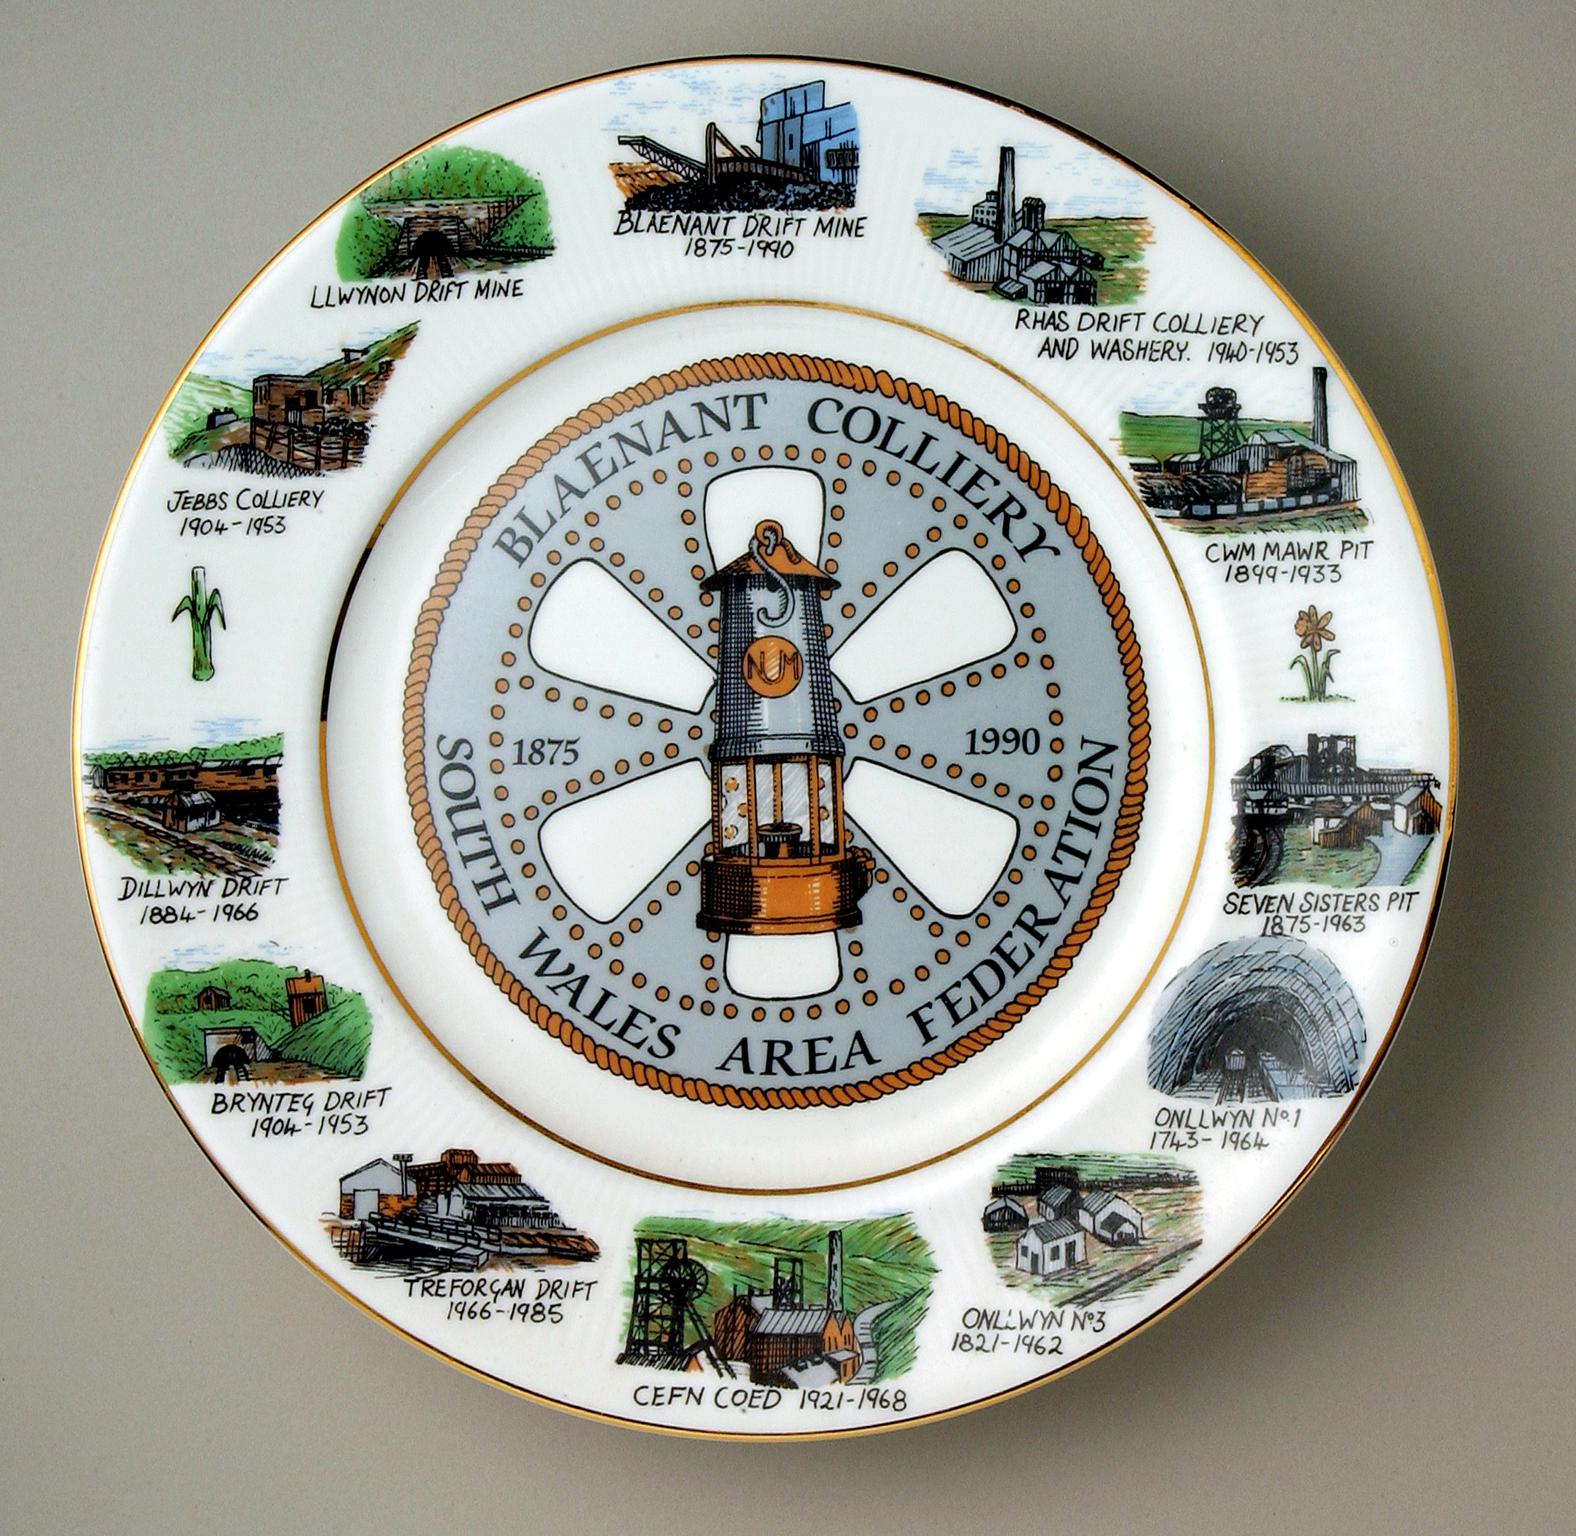 Blaenant Colliery commemorative plate 1875-1990